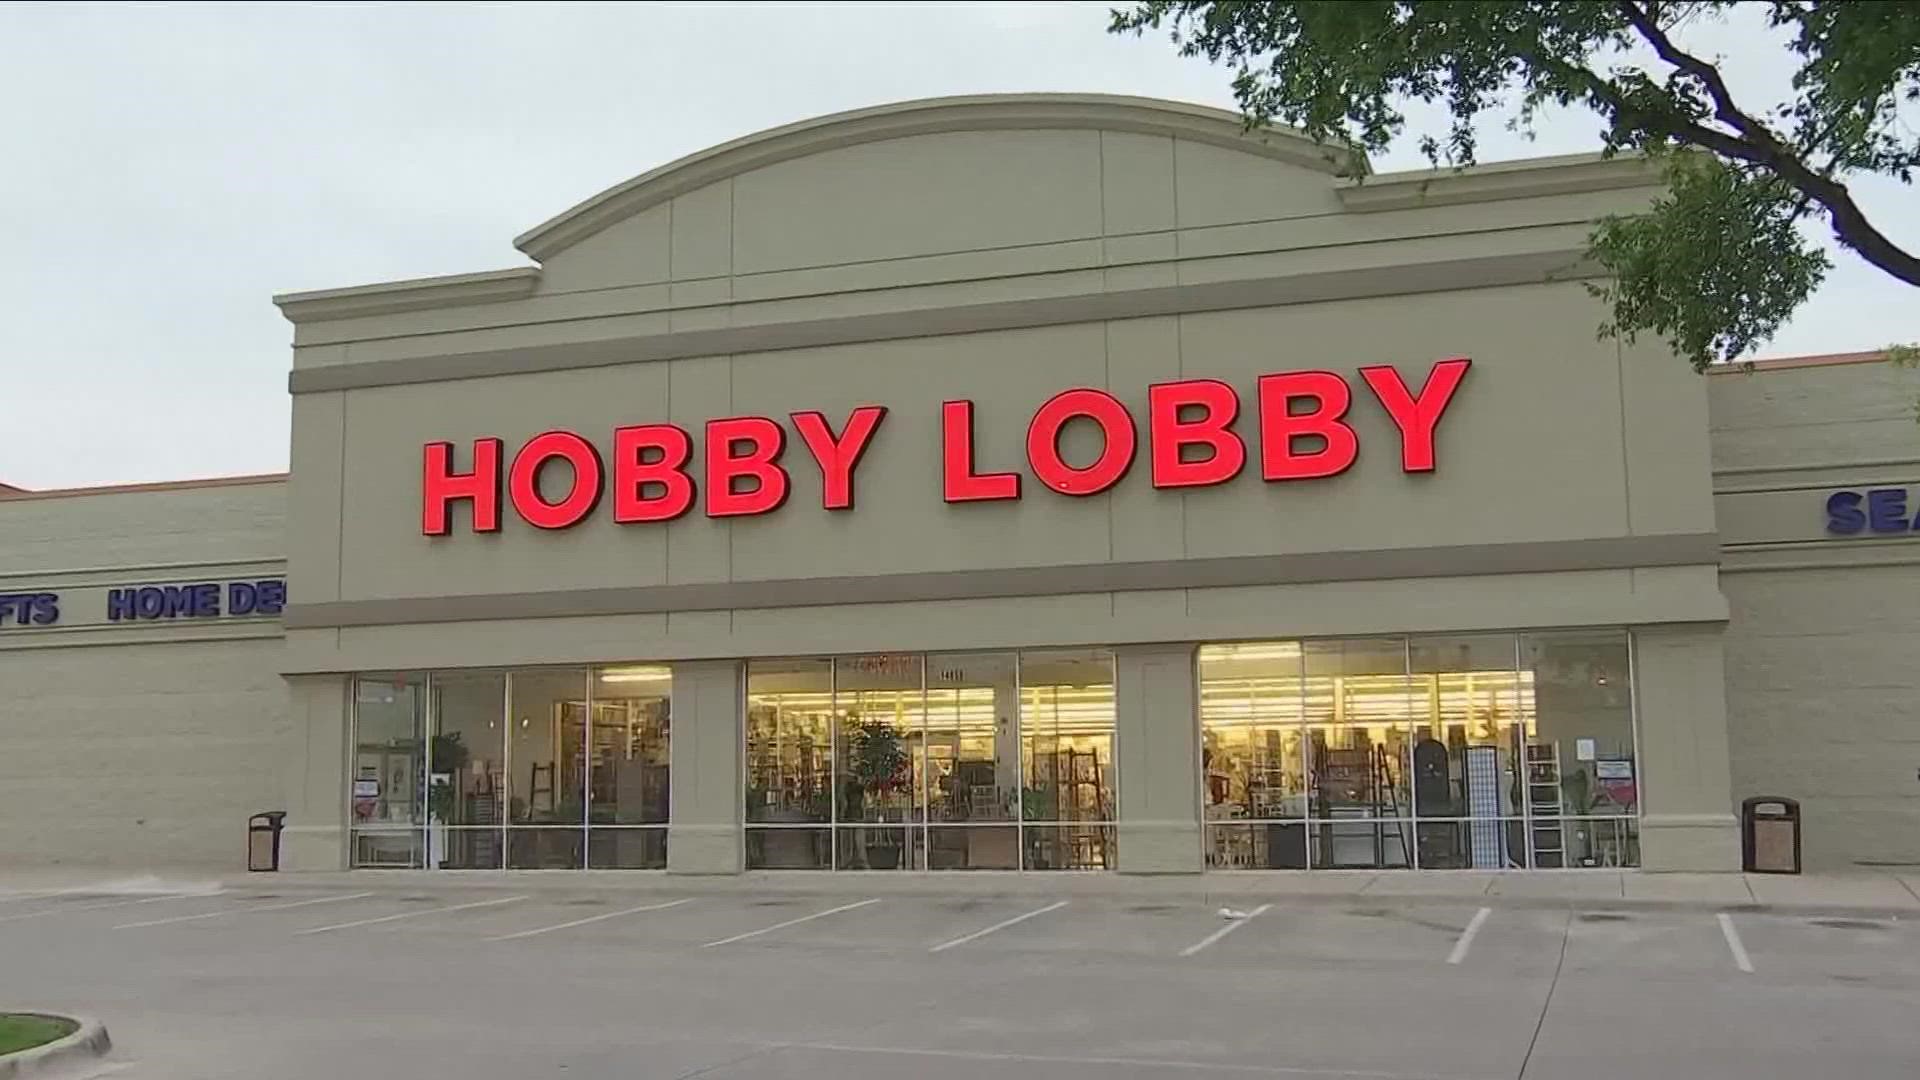 Hobby Lobby looks to add location in Western New York